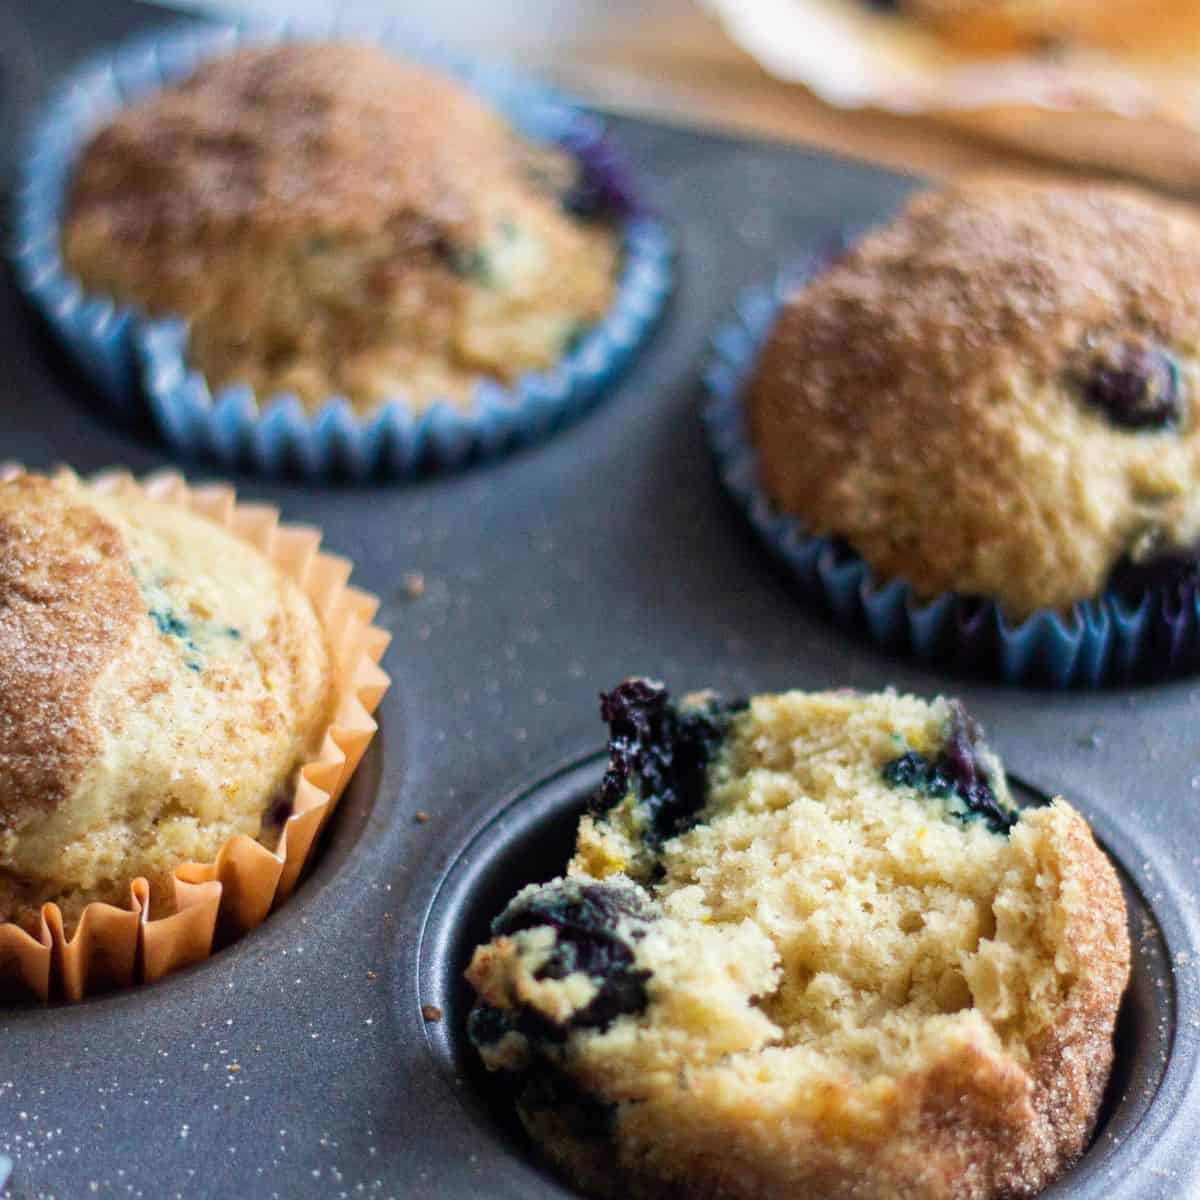 Easy and Delicious Vegan Blueberry Muffins